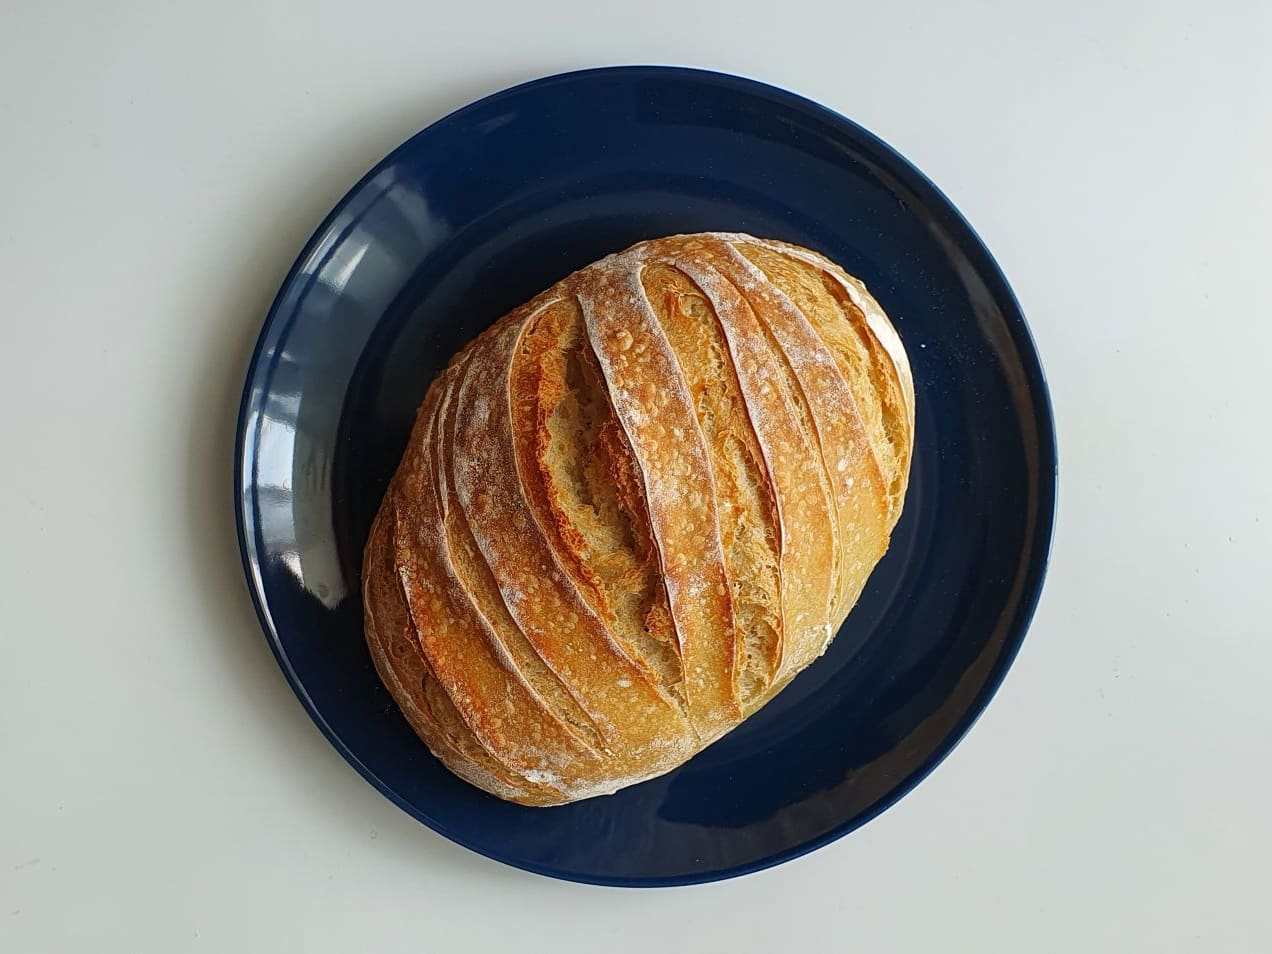 1 x White Sourdough Bread at Last Crumb - Get Deals, Cashback and Rewards with ShopBack GO